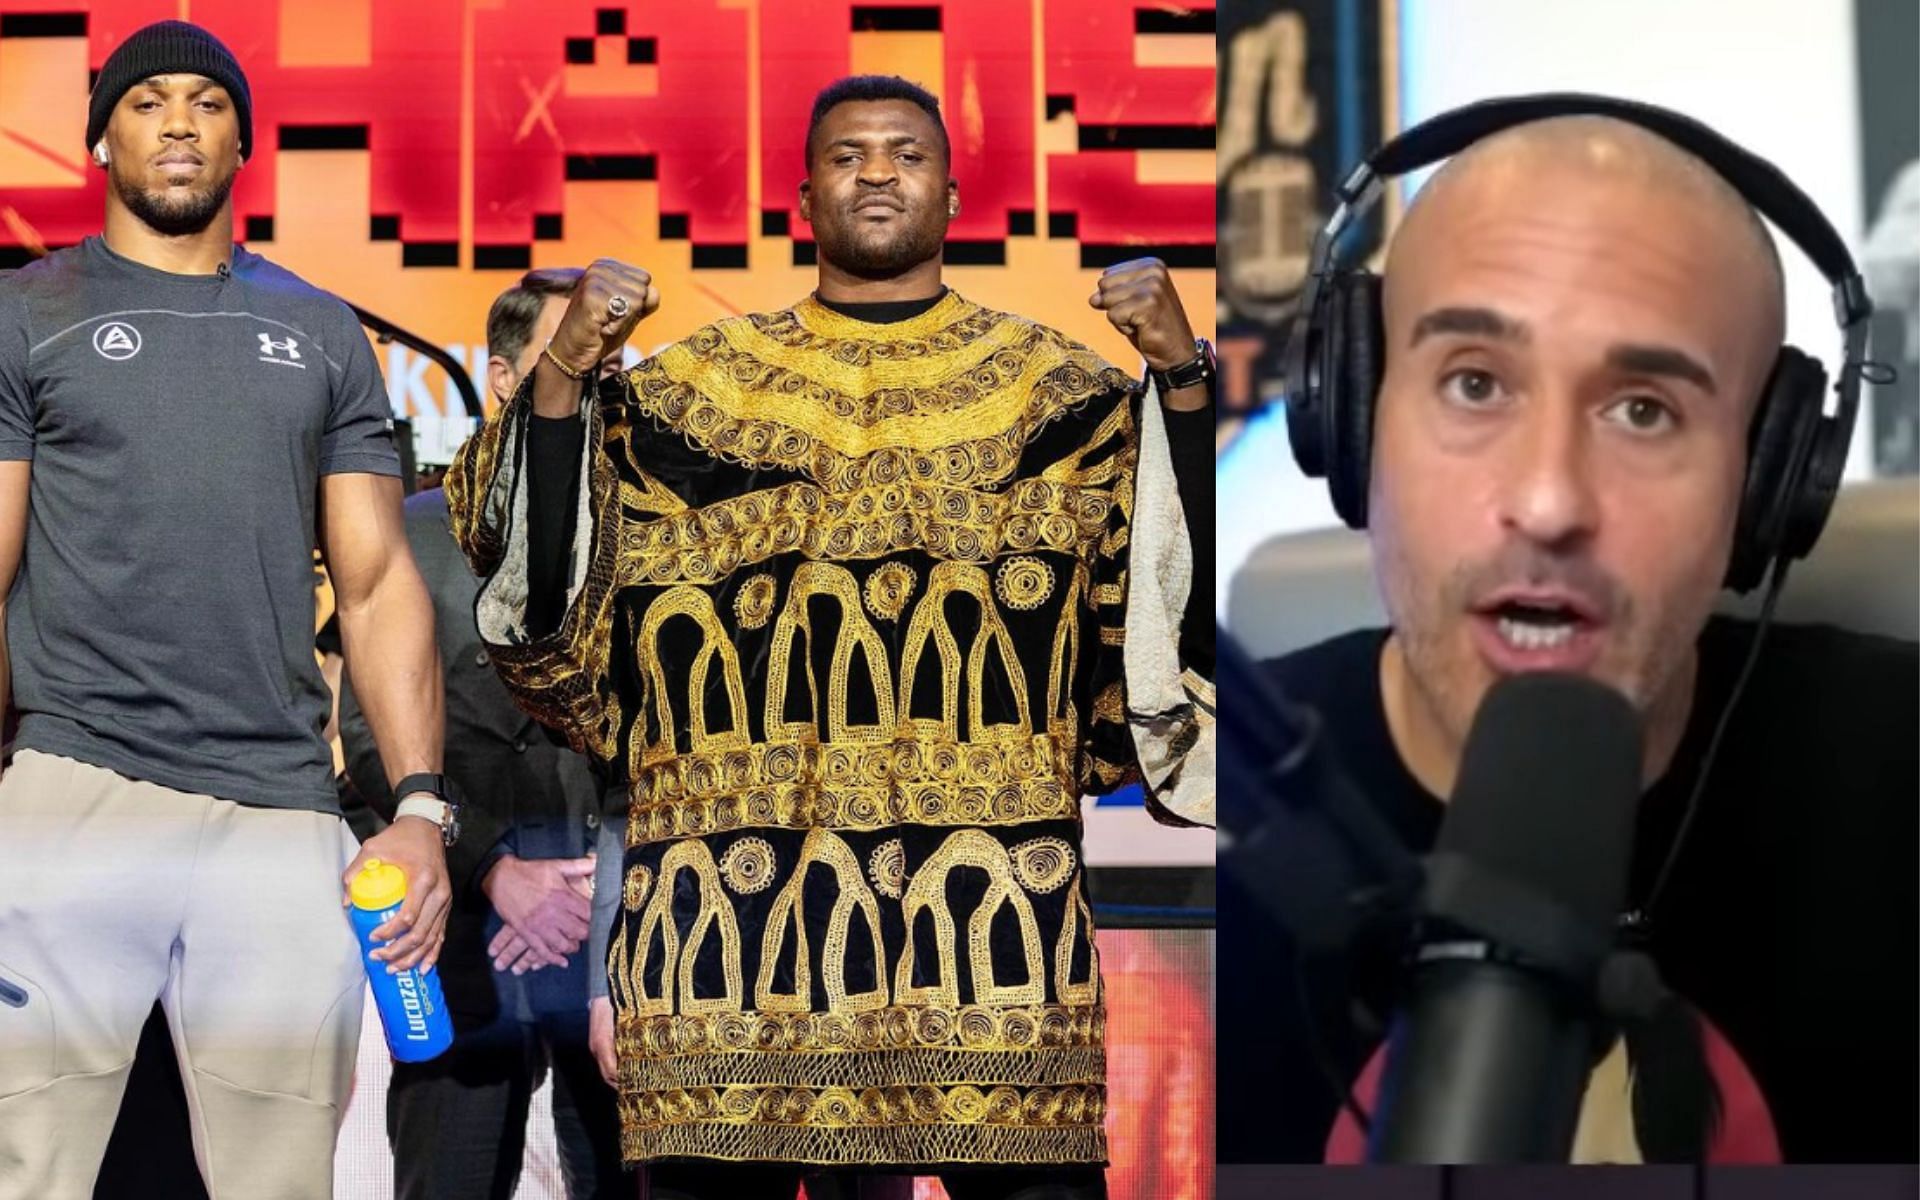 Francis Ngannou (middle) may not returing to MMA after facing Anthony Joshua (left), says Jon Anik (right) [Images Courtesy: @draftkings on YouTube and @francisngannou on Instagram]